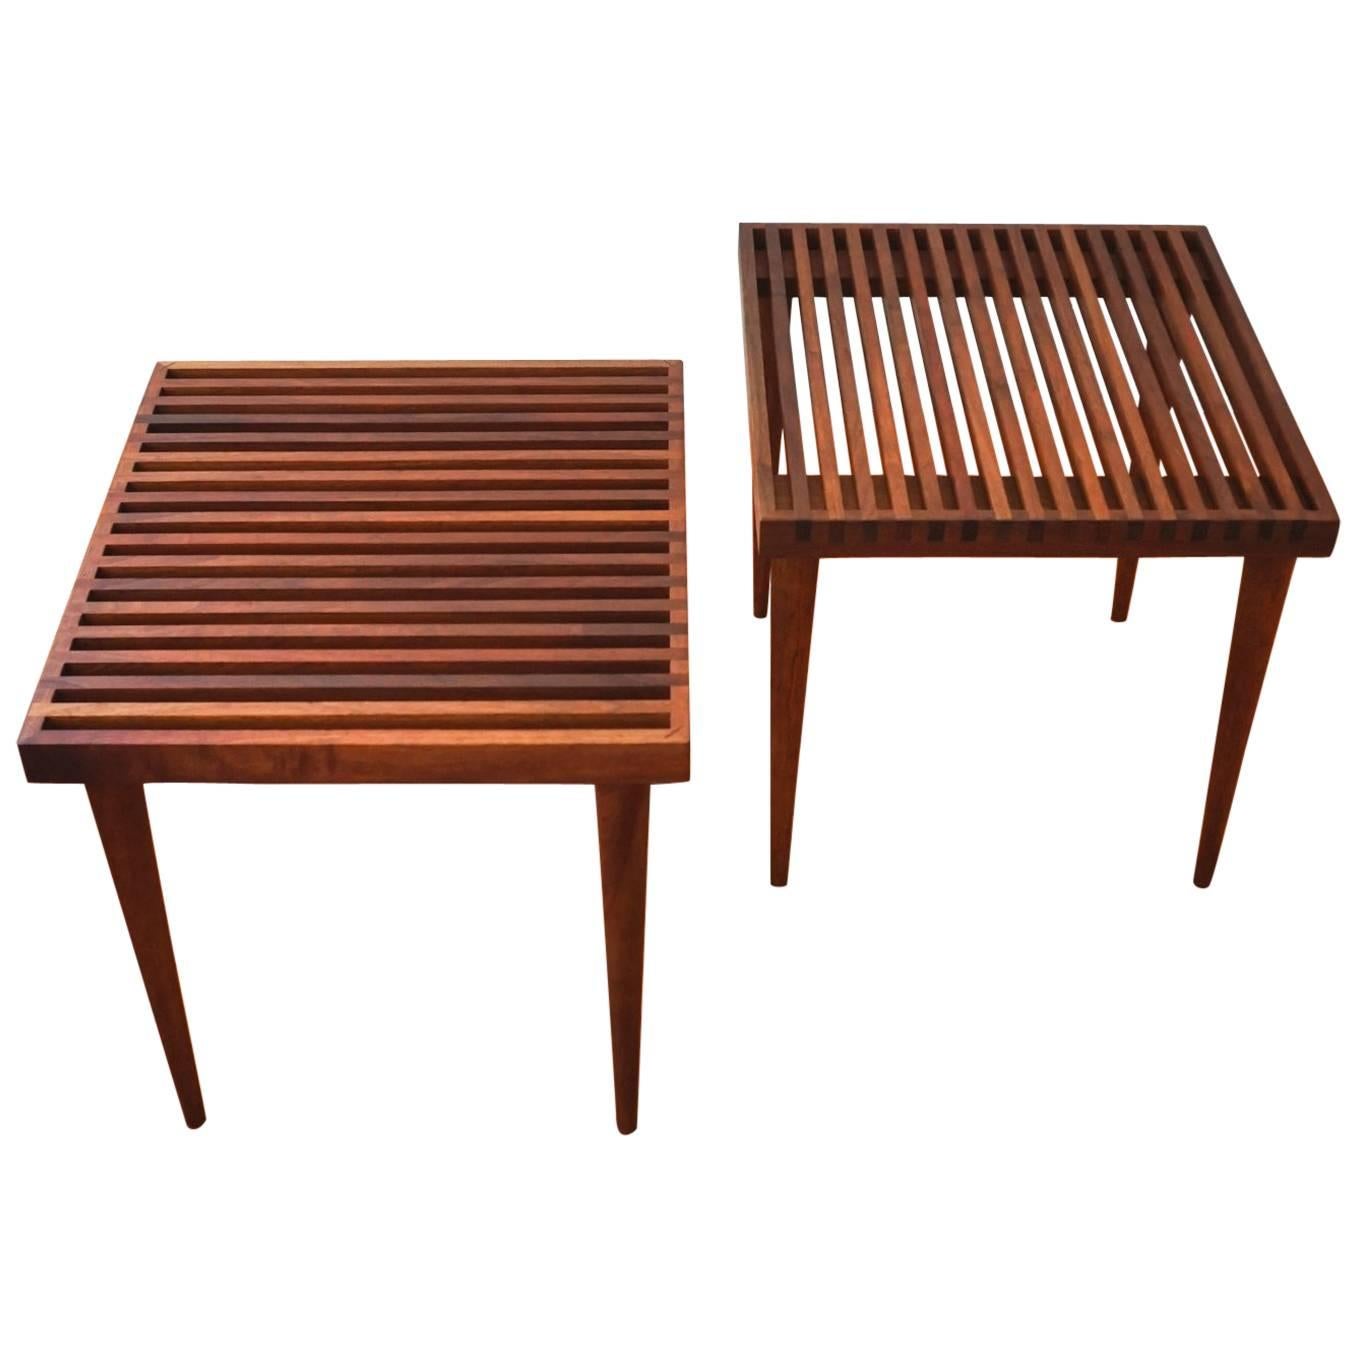 Pair of Side Tables by Mel Smilow